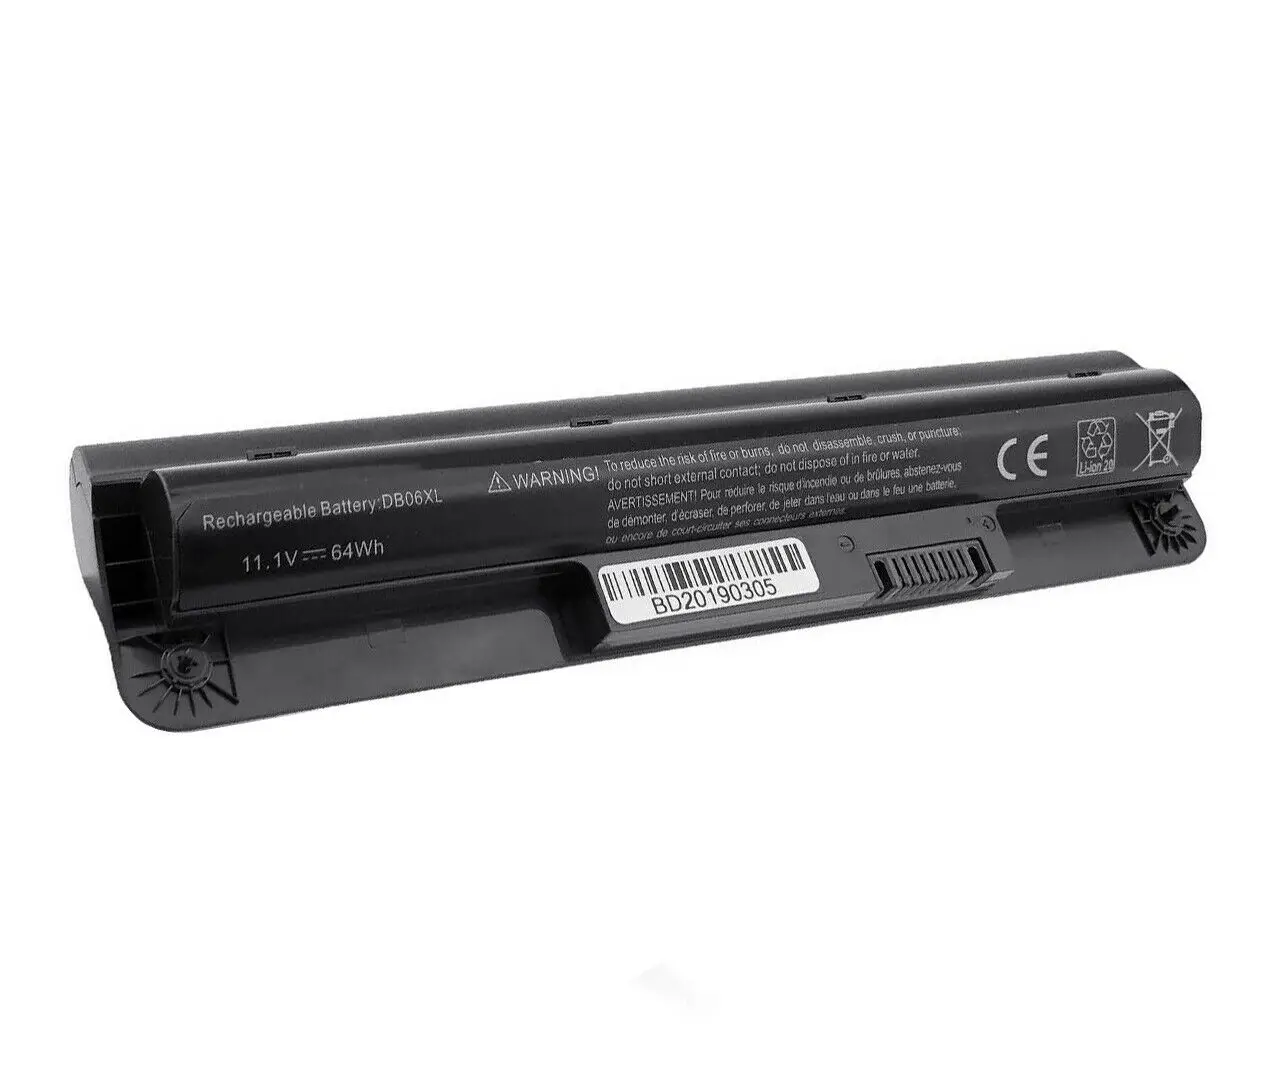 

797430-001 Genuine new laptop battery DB06XL for HP ProBook 11 EE G1 G2 HSTNN-IB6W original battery batteries 11.1V 64Wh 6 cell